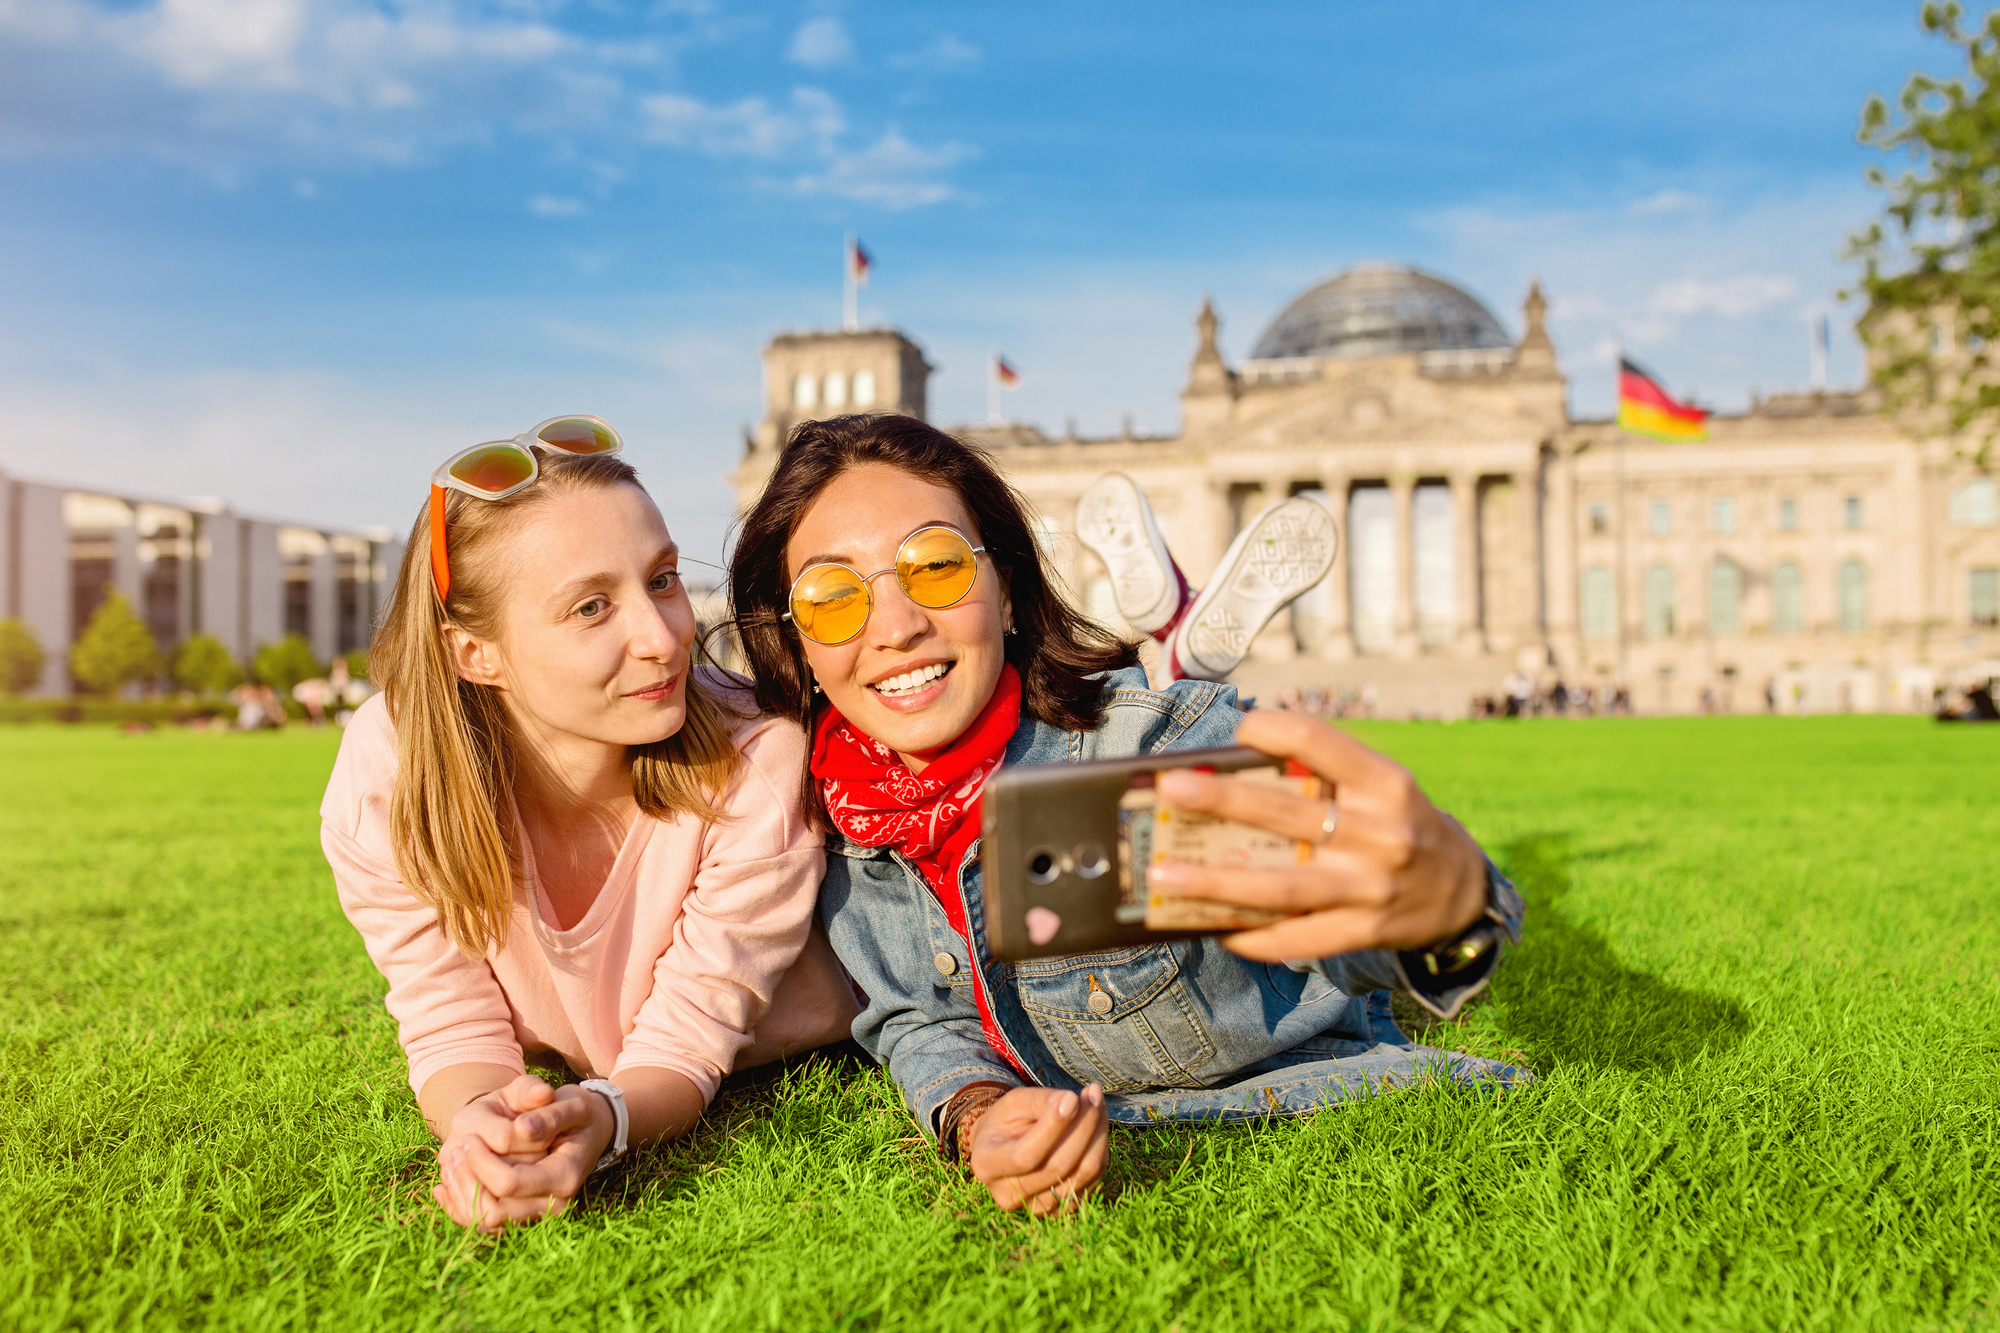 two-happy-young-girls-lying-on-grass-take-selfie-with-historic-building-and-german-flag-in-the-background-during-study-abroad-program